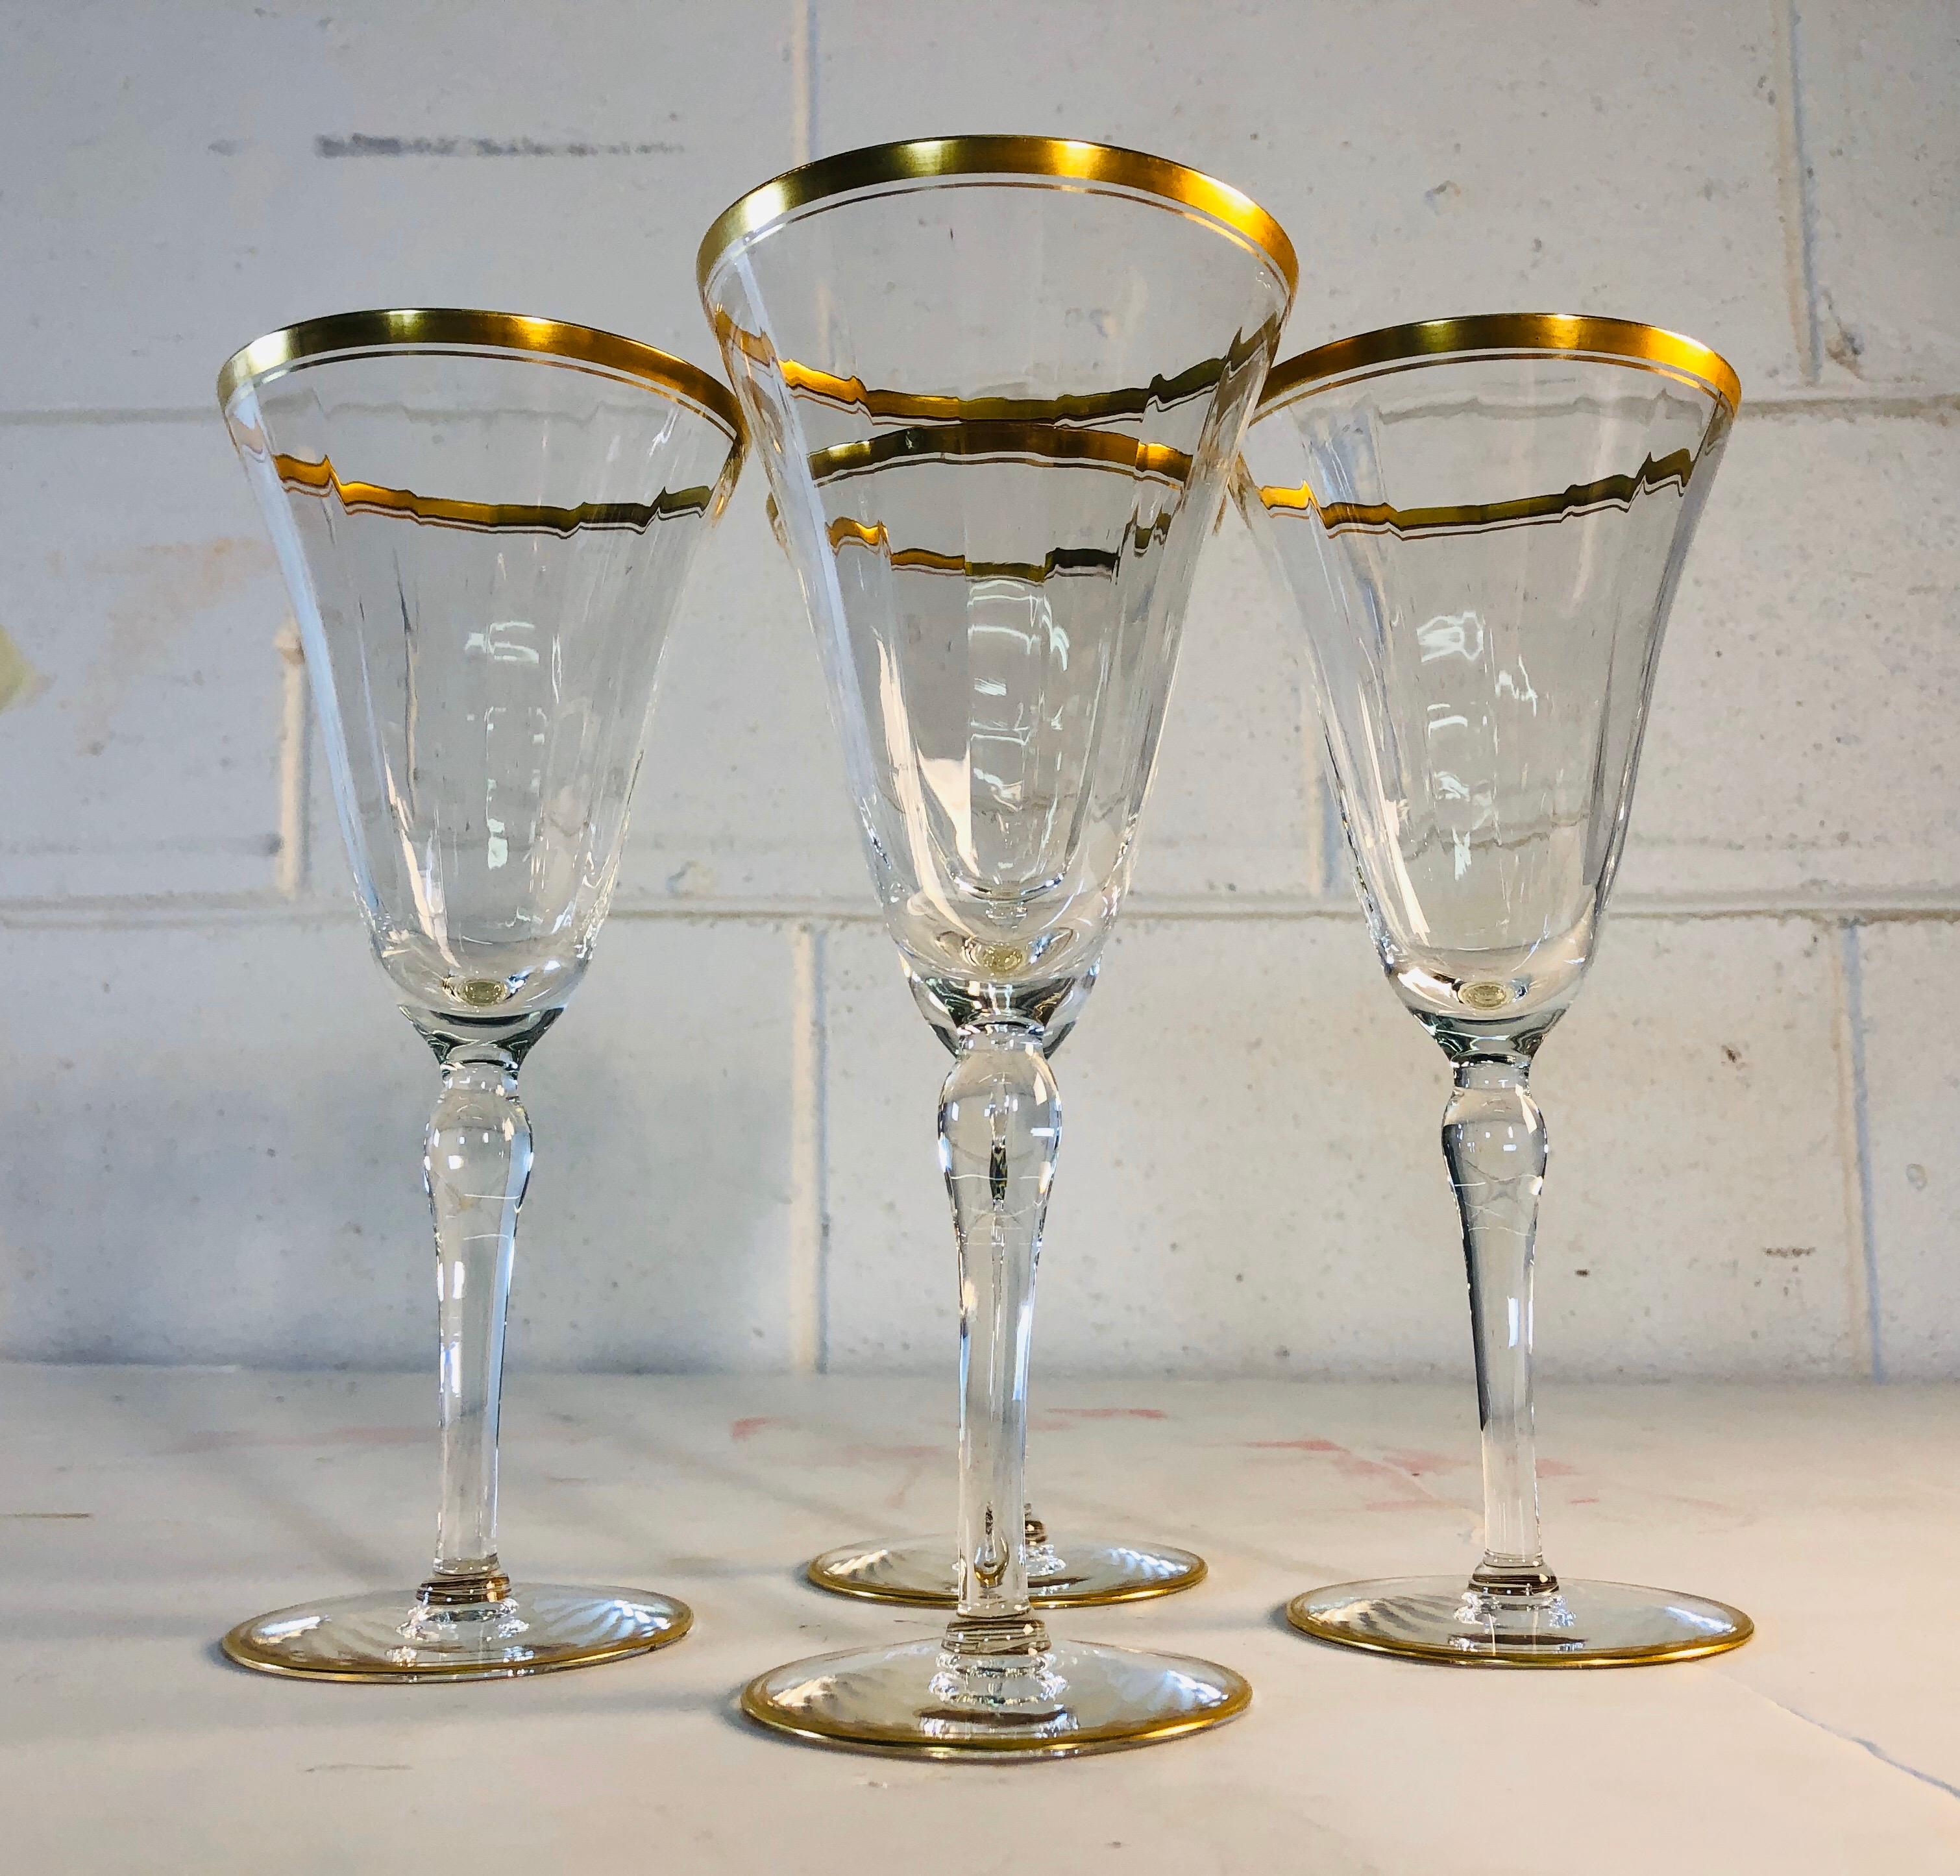 Hollywood Regency style double gold rim tall champagne or wine stems, set of 4. Excellent condition. No marks.
  